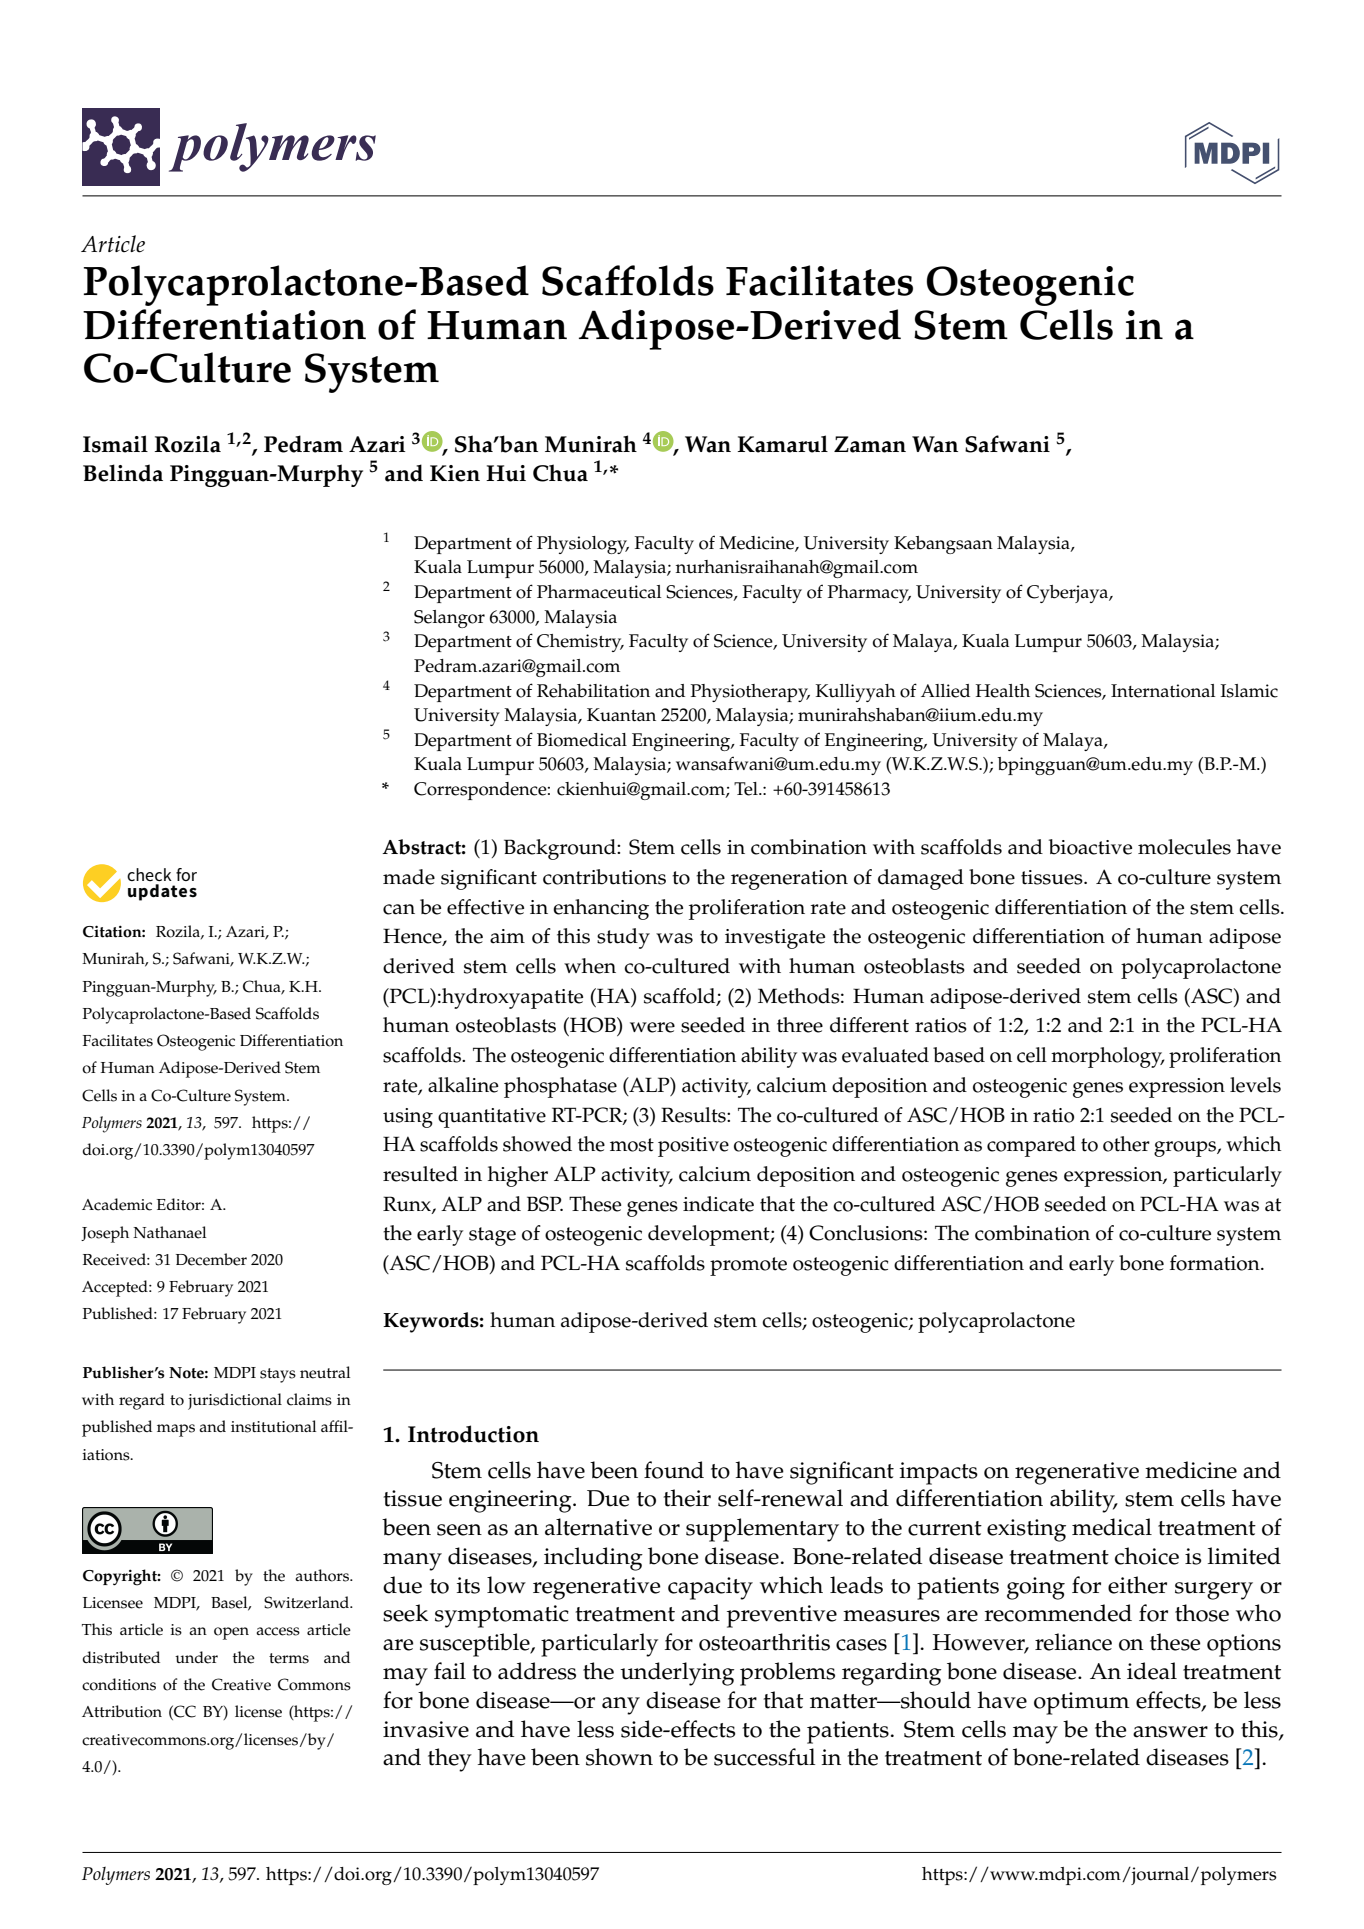 Polycaprolactone-Based Scaffolds Facilitate Alt-Osteogenic Differentiation of Human Adipose-Derived Stem Cells in a Co-Culture System